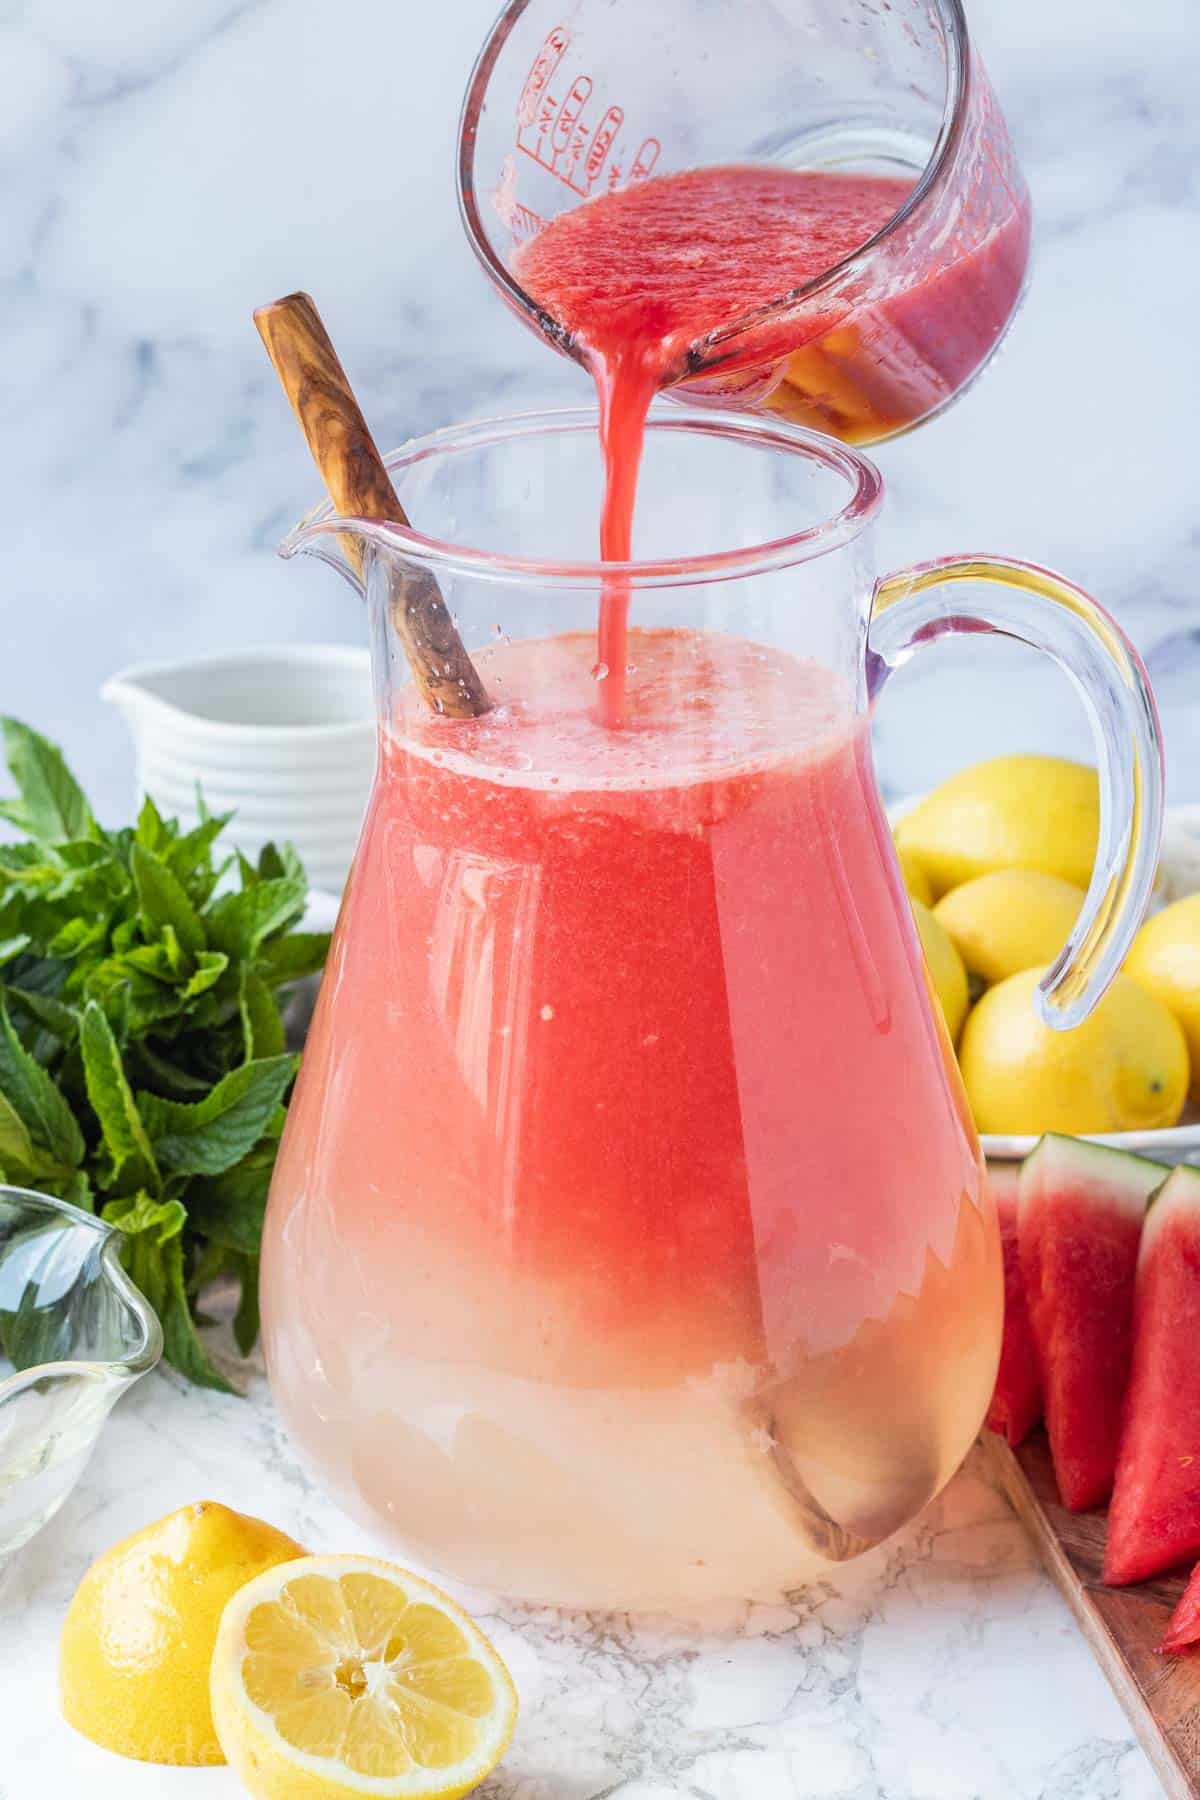 Pouring watermelon juice into clear pitcher of water with mint, lemons, and watermelon in background.